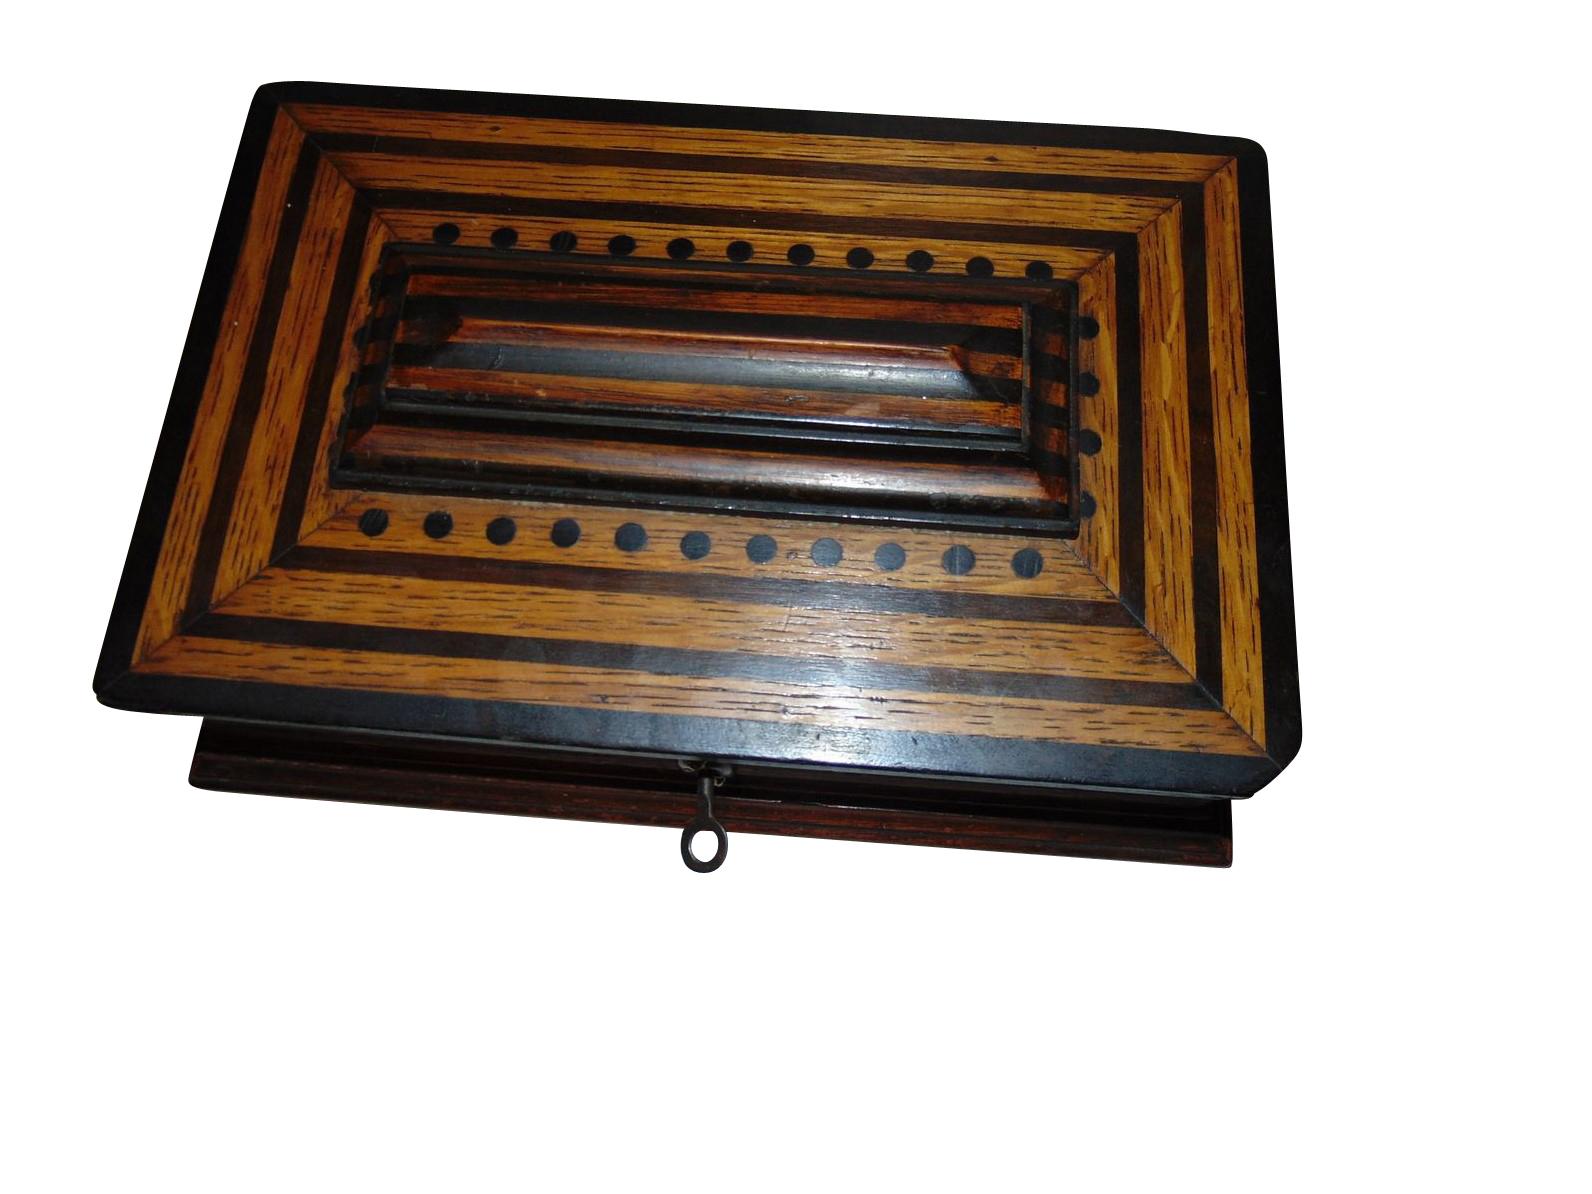 Petite and elegant wooden box or jewelry box from the German Art Deco period in the early 1930s. Made out of solid oakwood it convinces with a Classic design and Fine striped details of ebonized wood and inlay works. Features the original brass